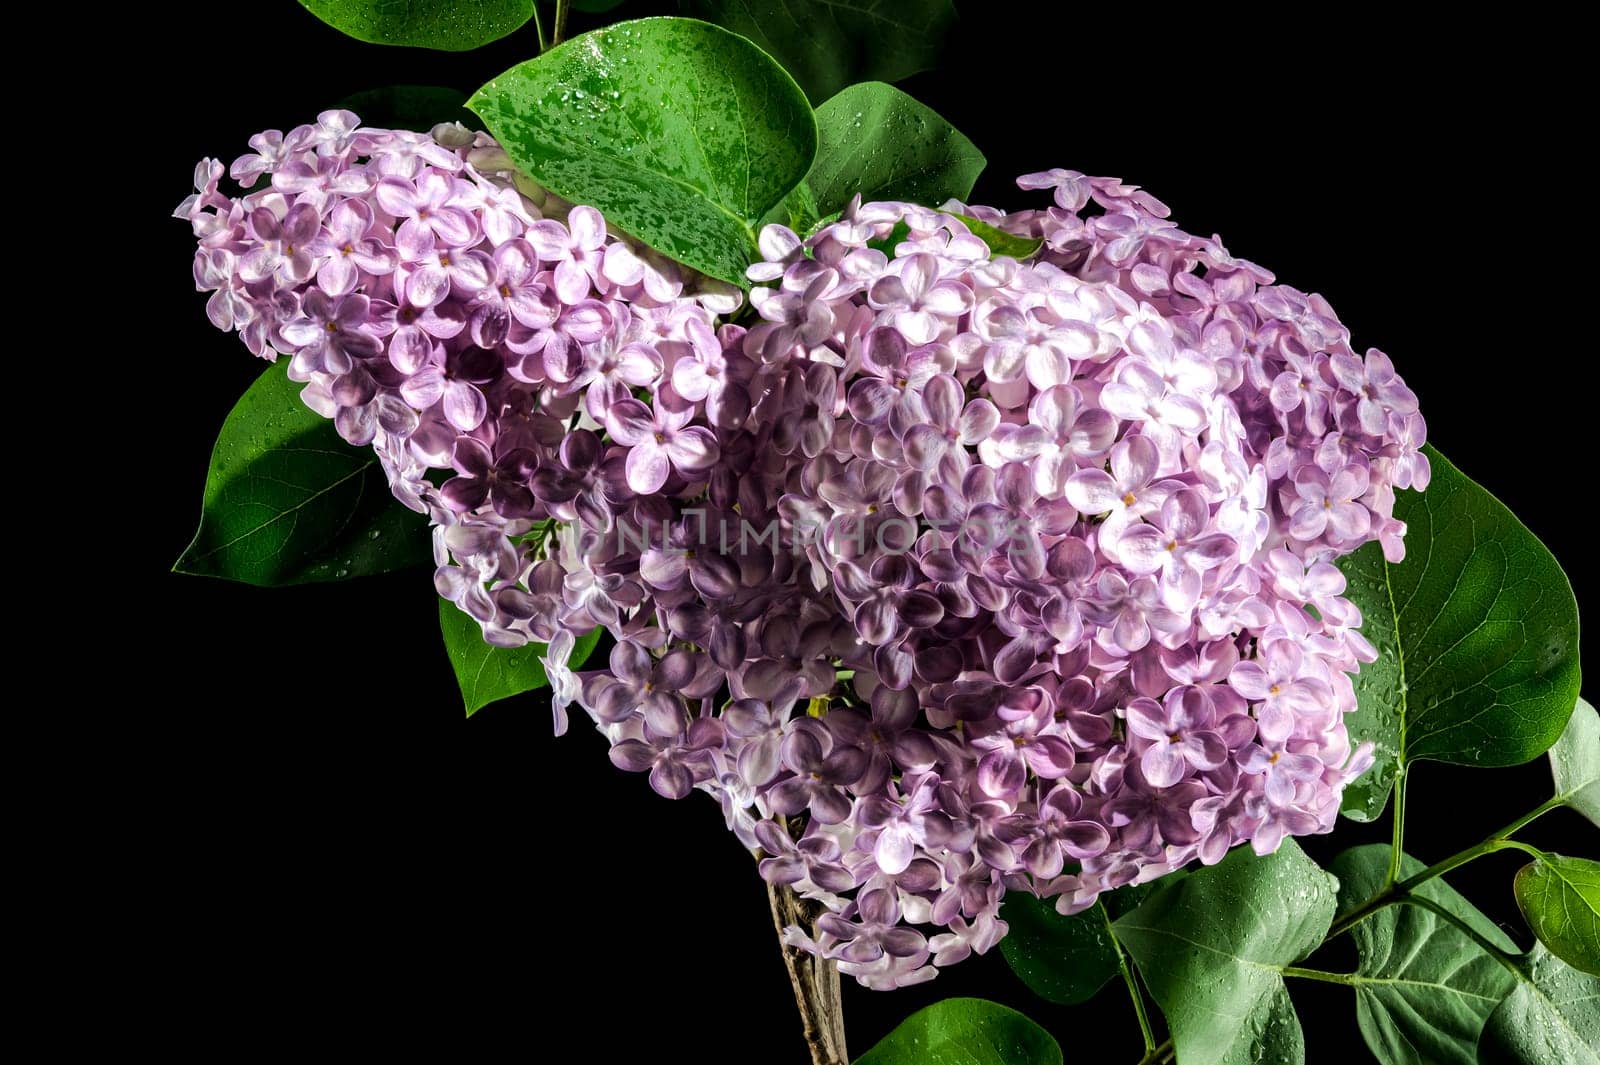 Blooming Pink flowers of Common lilac on a black background by Multipedia